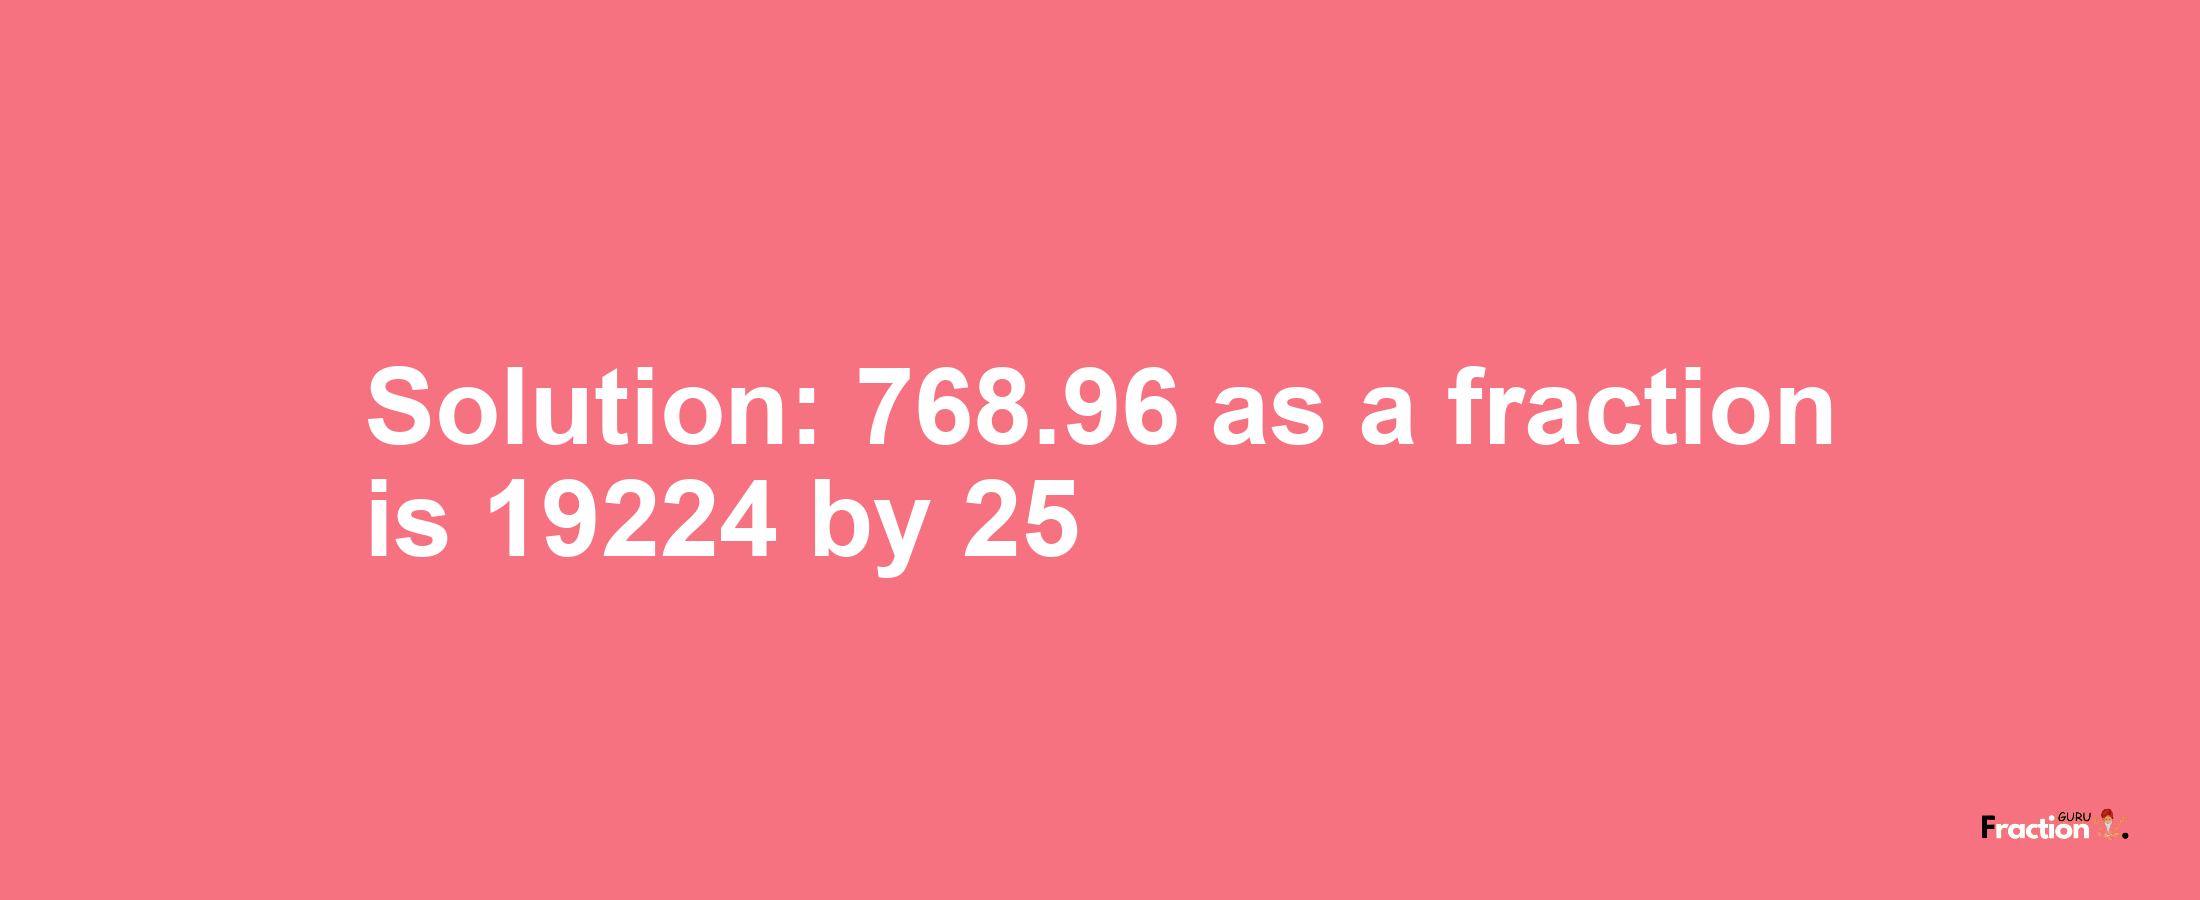 Solution:768.96 as a fraction is 19224/25